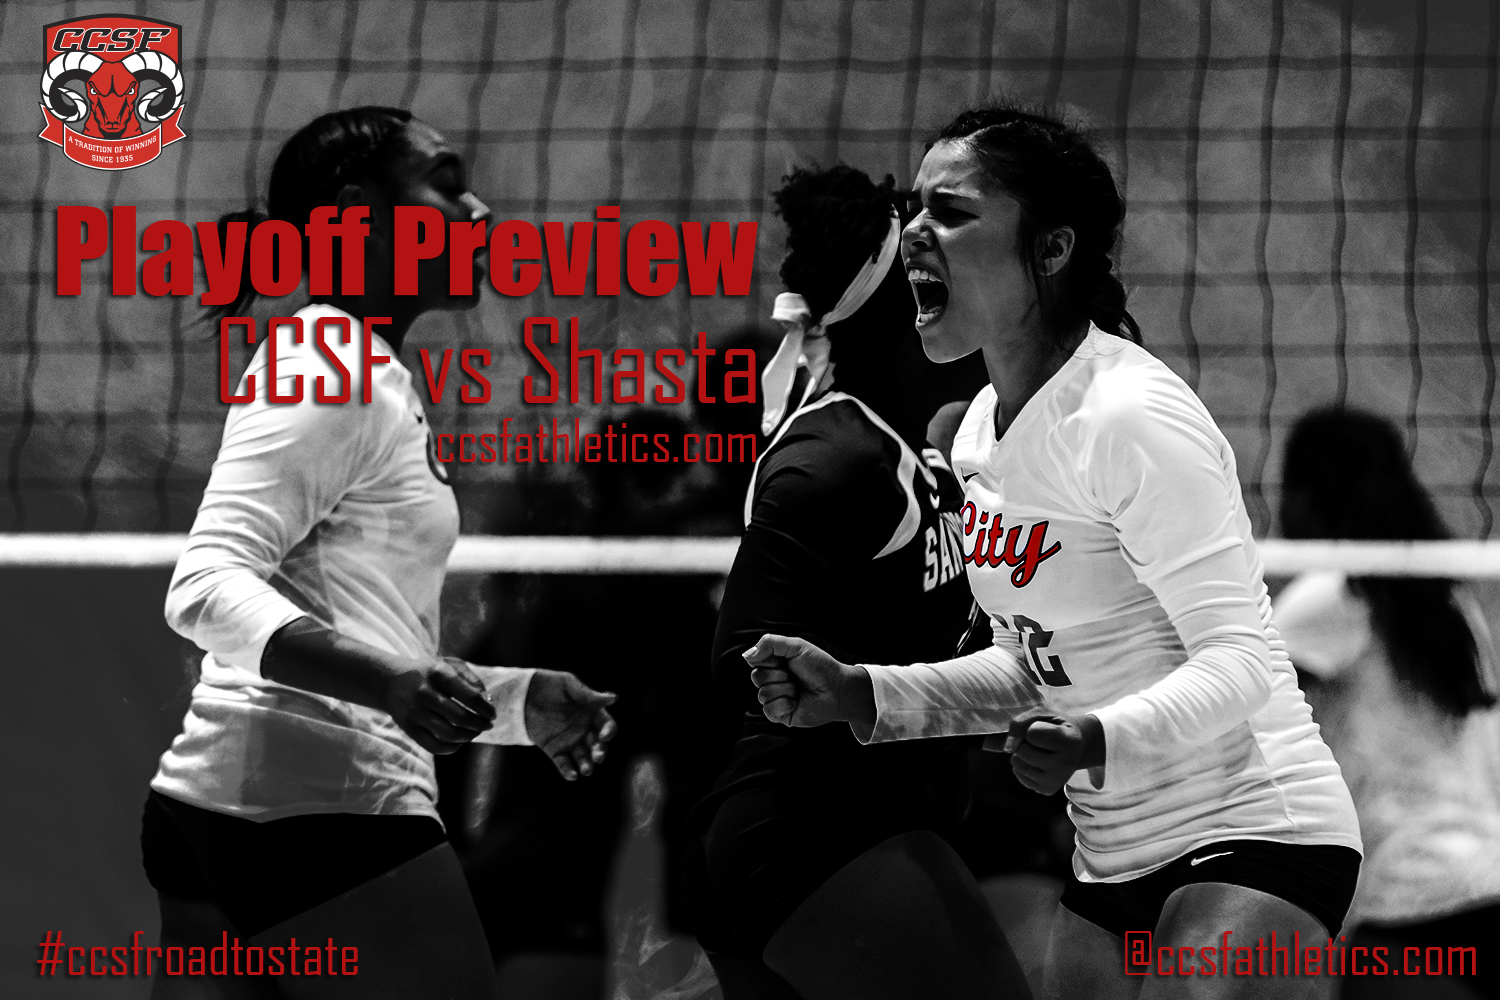 Women's Volleyball Playoff Preview - CCSF vs Shasta College